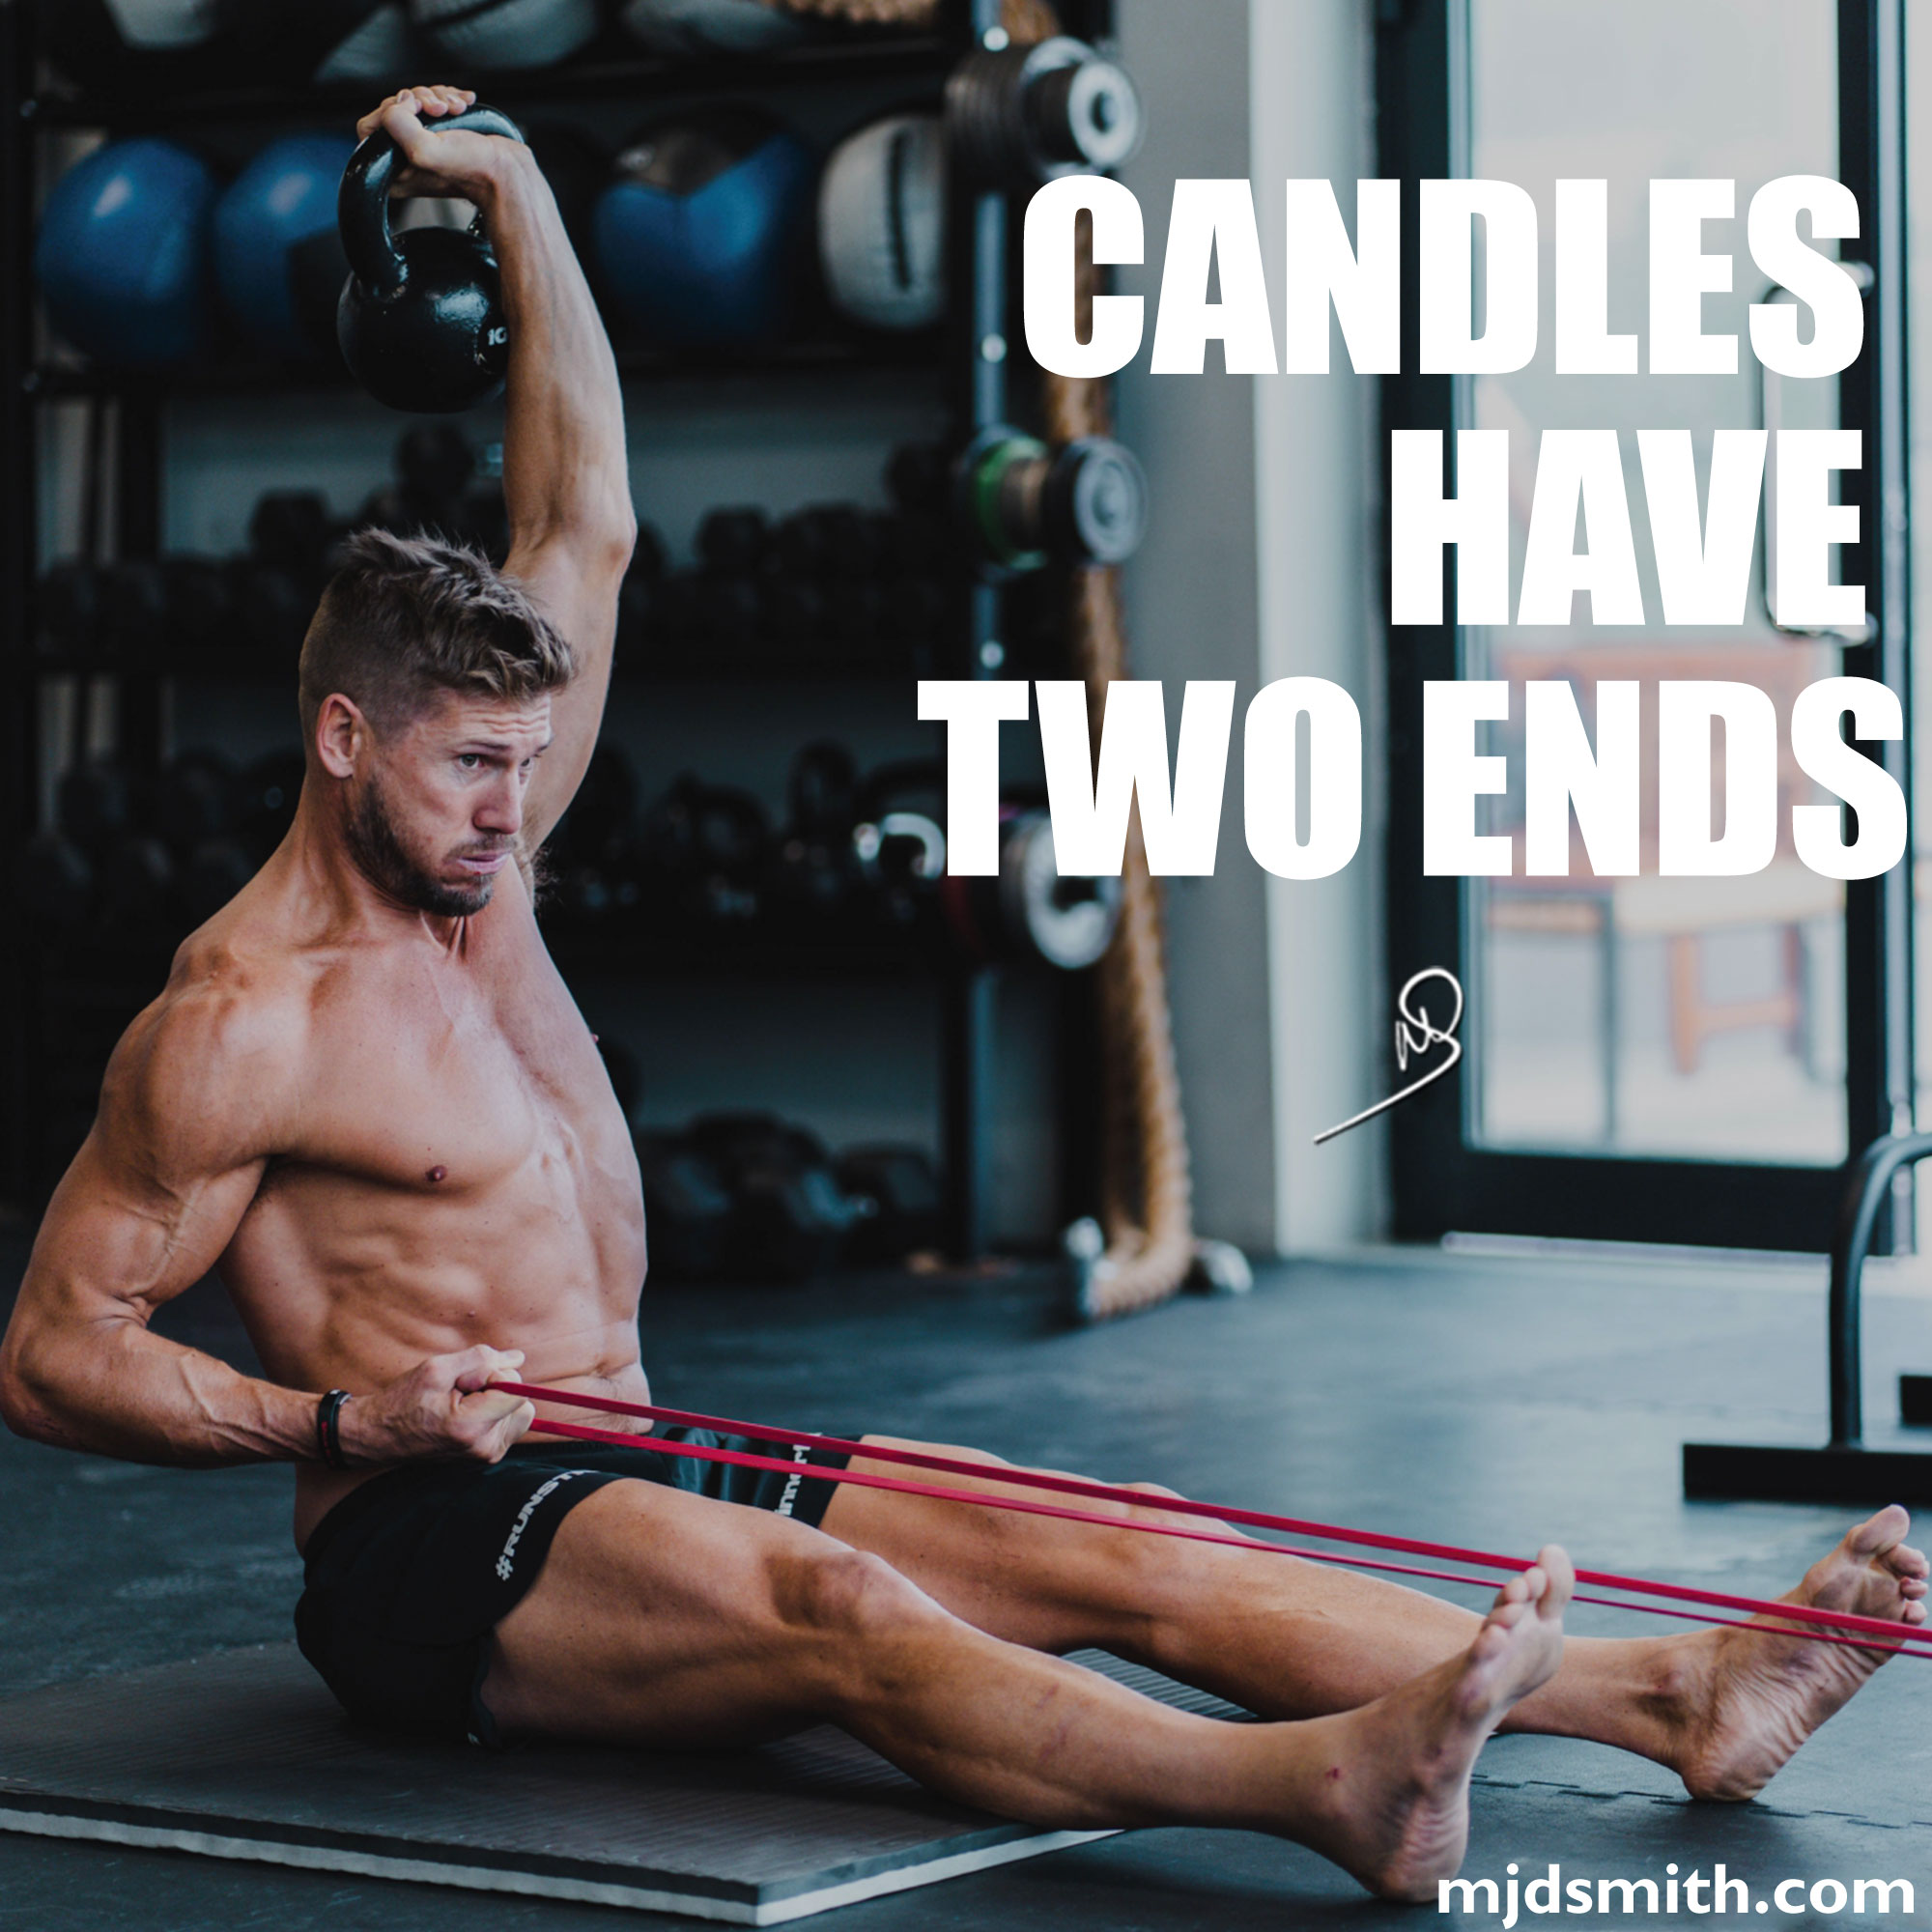 Candles have two ends